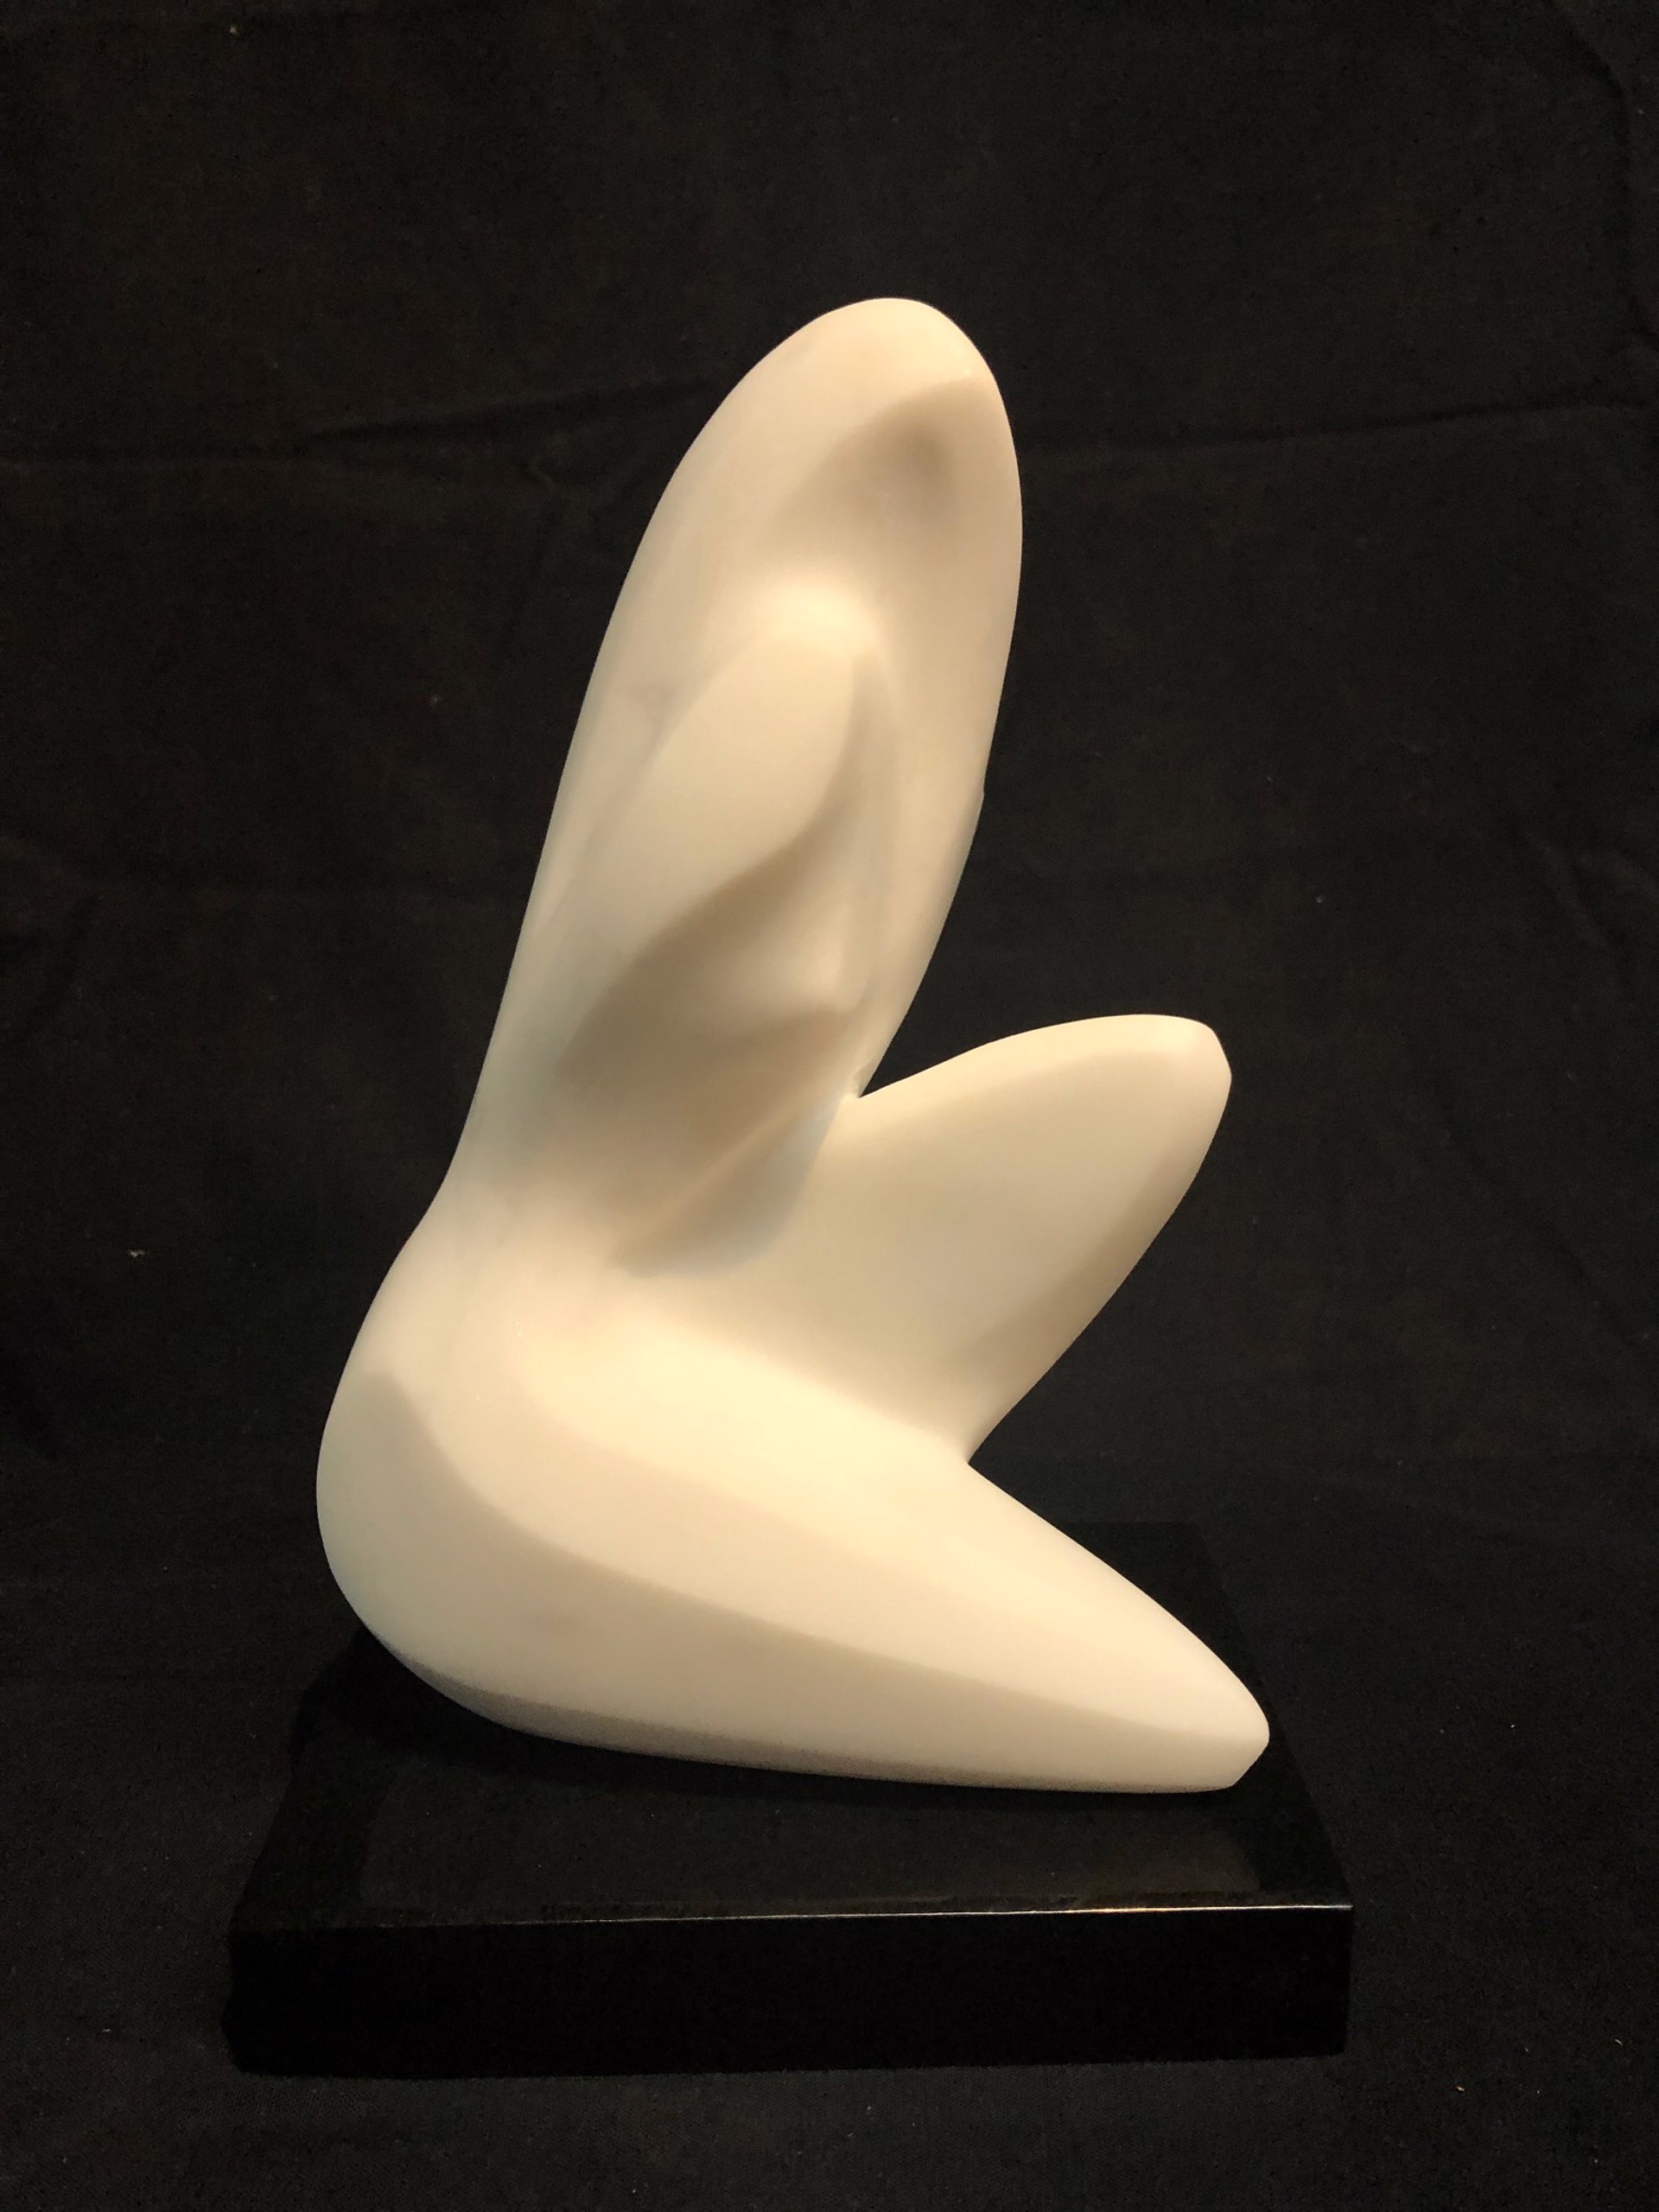 Holding On For Life (Maquette) by Steven Lustig